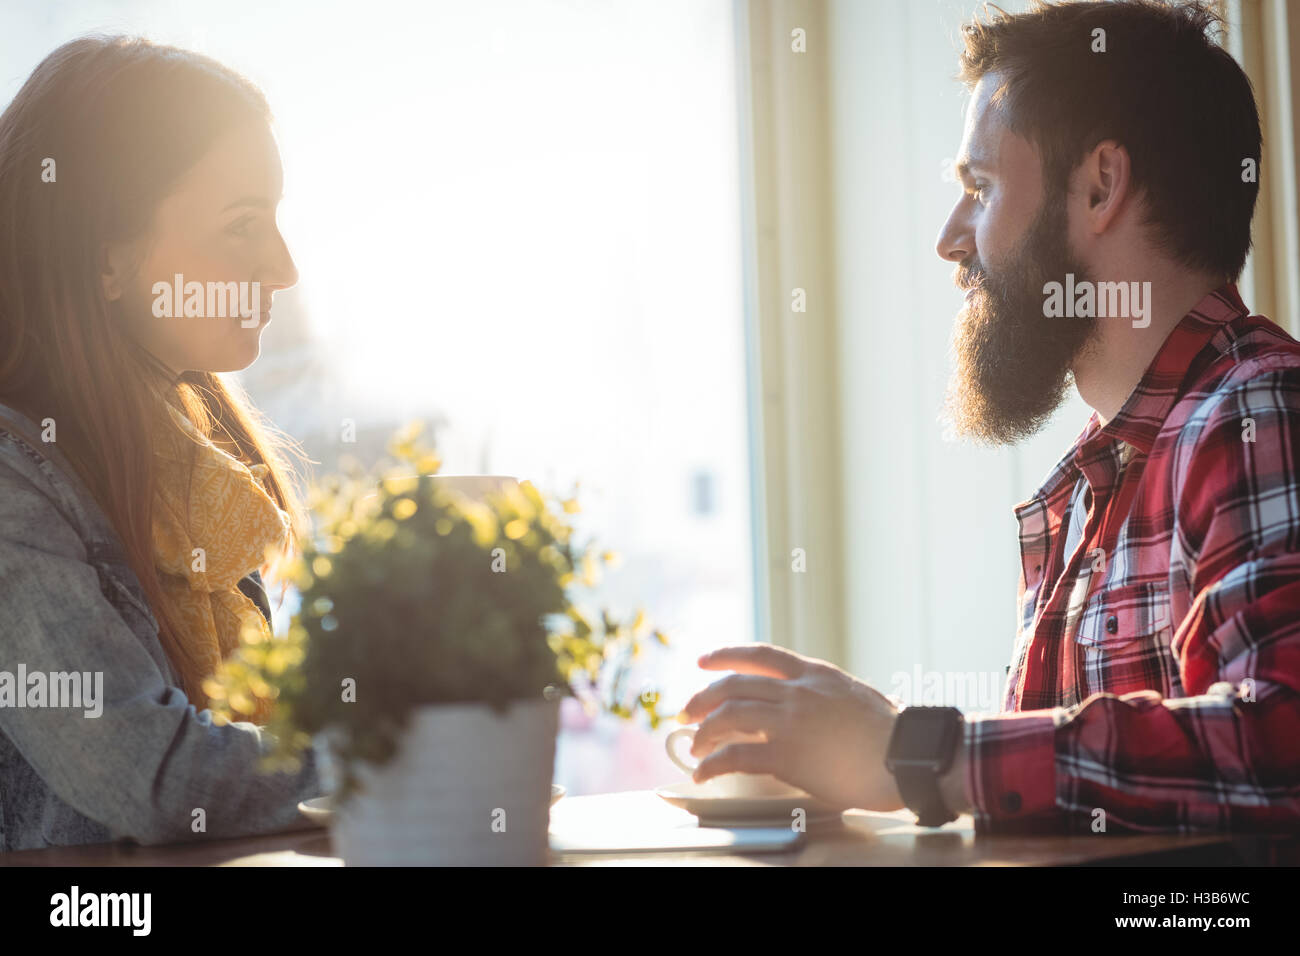 Side view of man and woman talking at cafe Banque D'Images